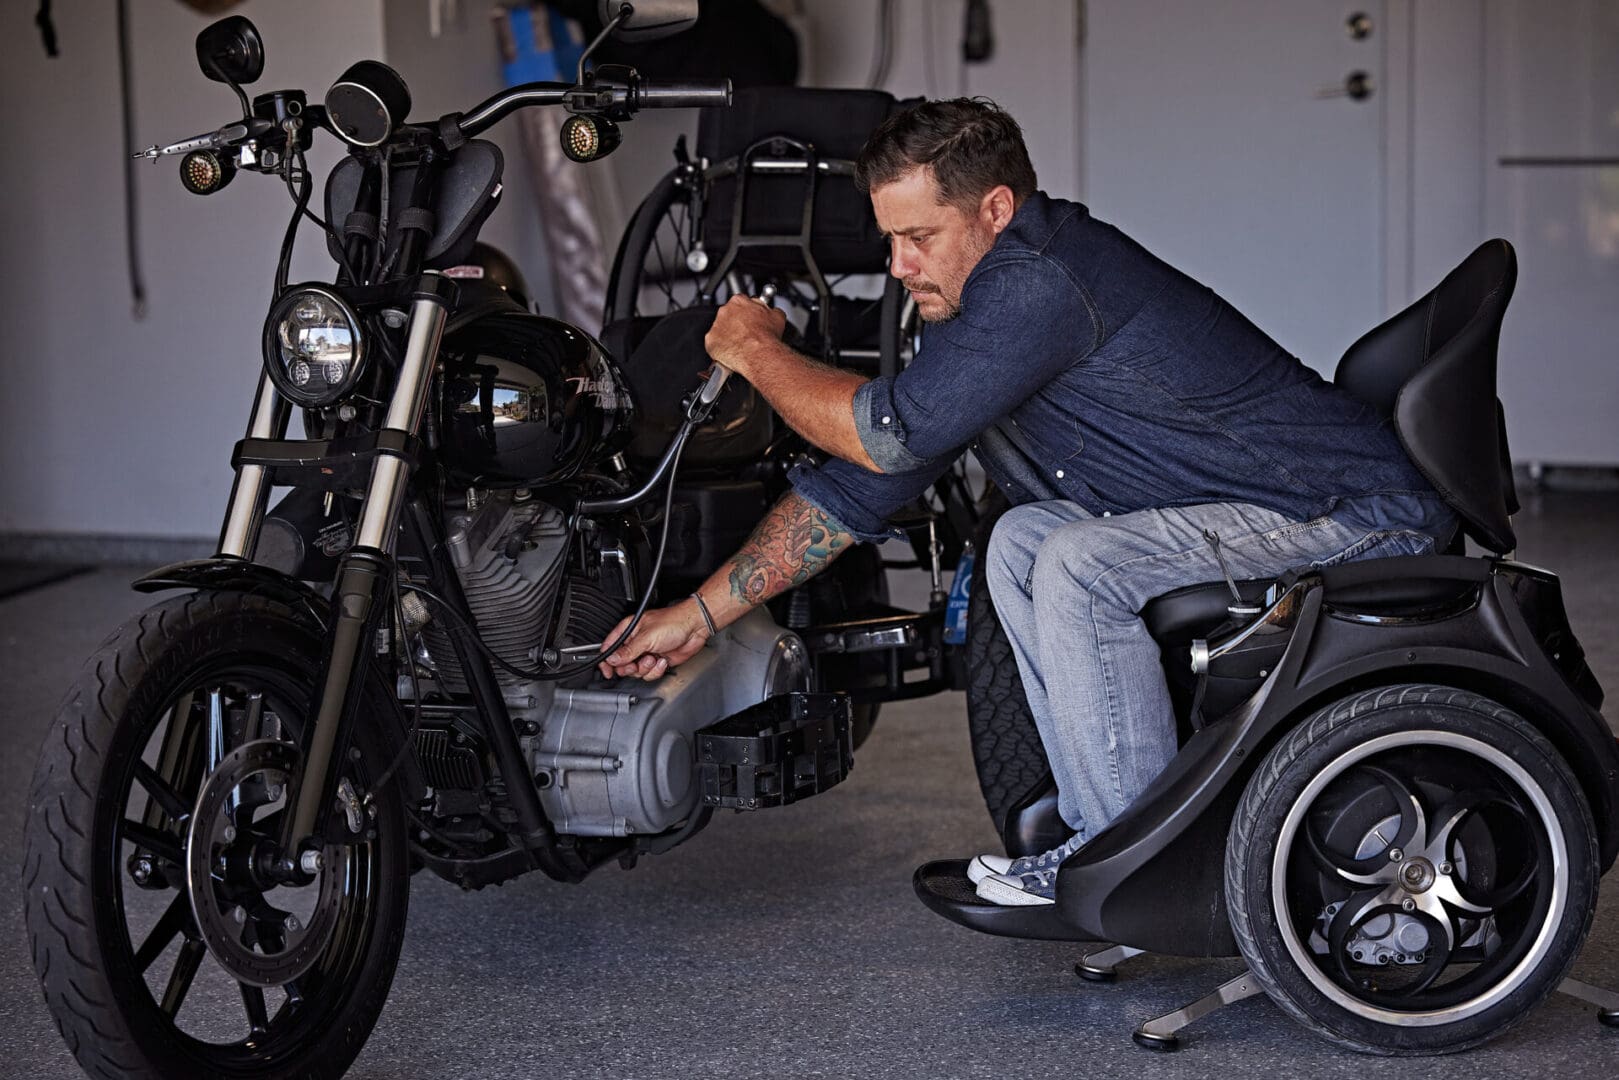 A man working on a motorcycle in a garage.